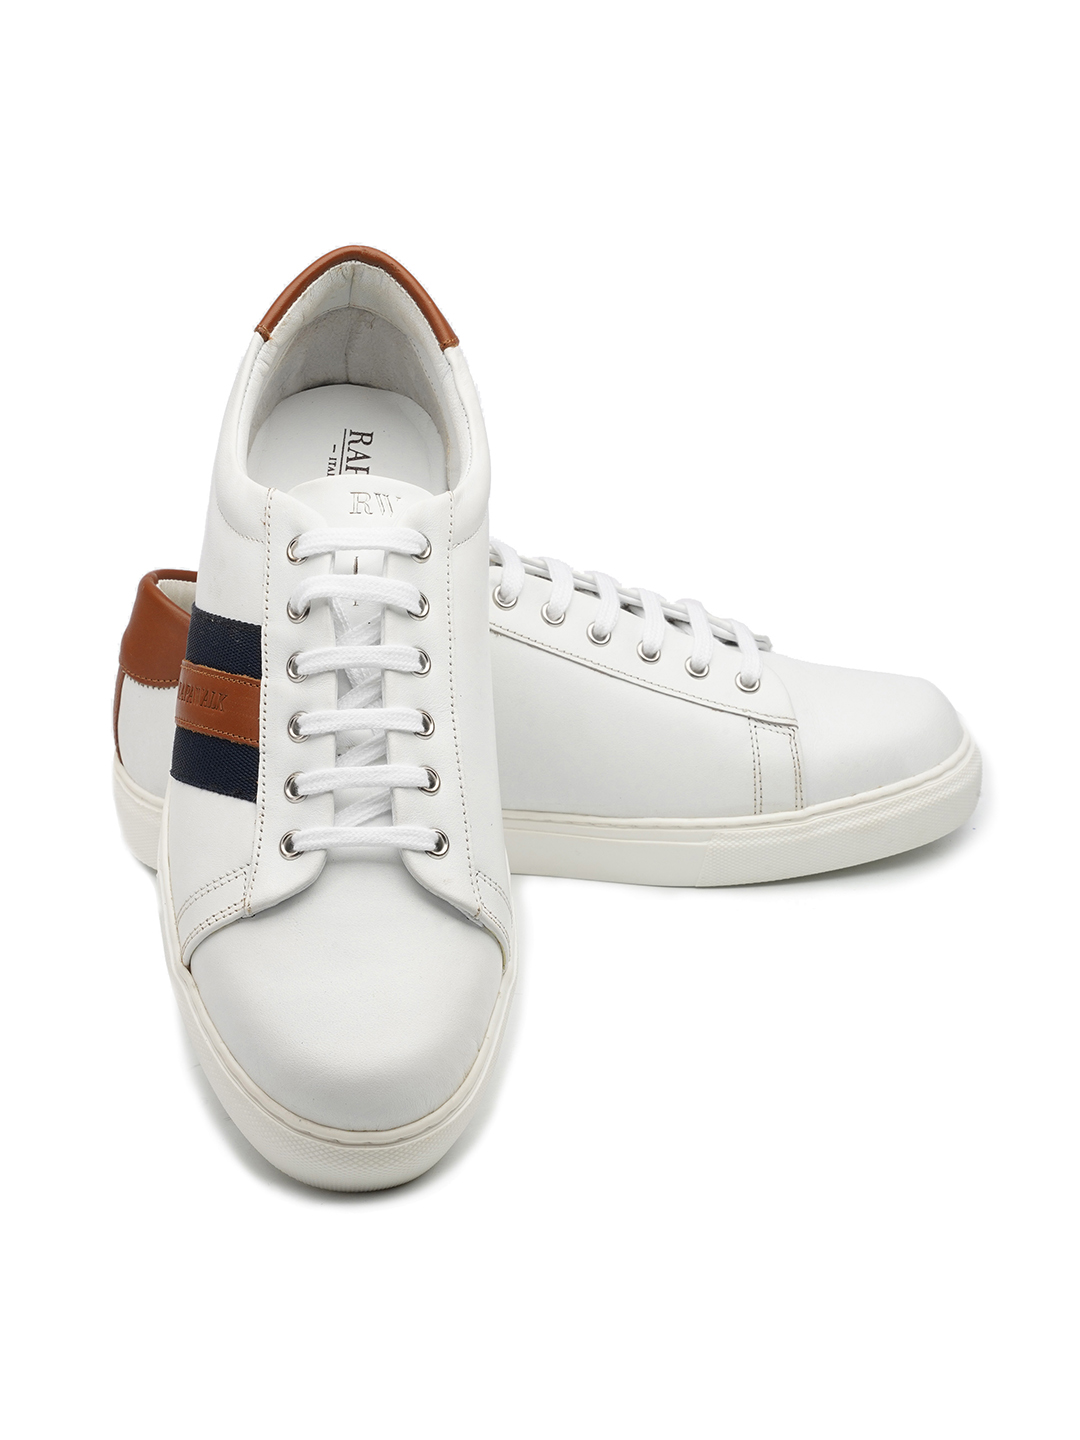 Louis -Vuitton Ollie Men sneakers, Size 9.5 LV- 10.5 US- Brand NEW